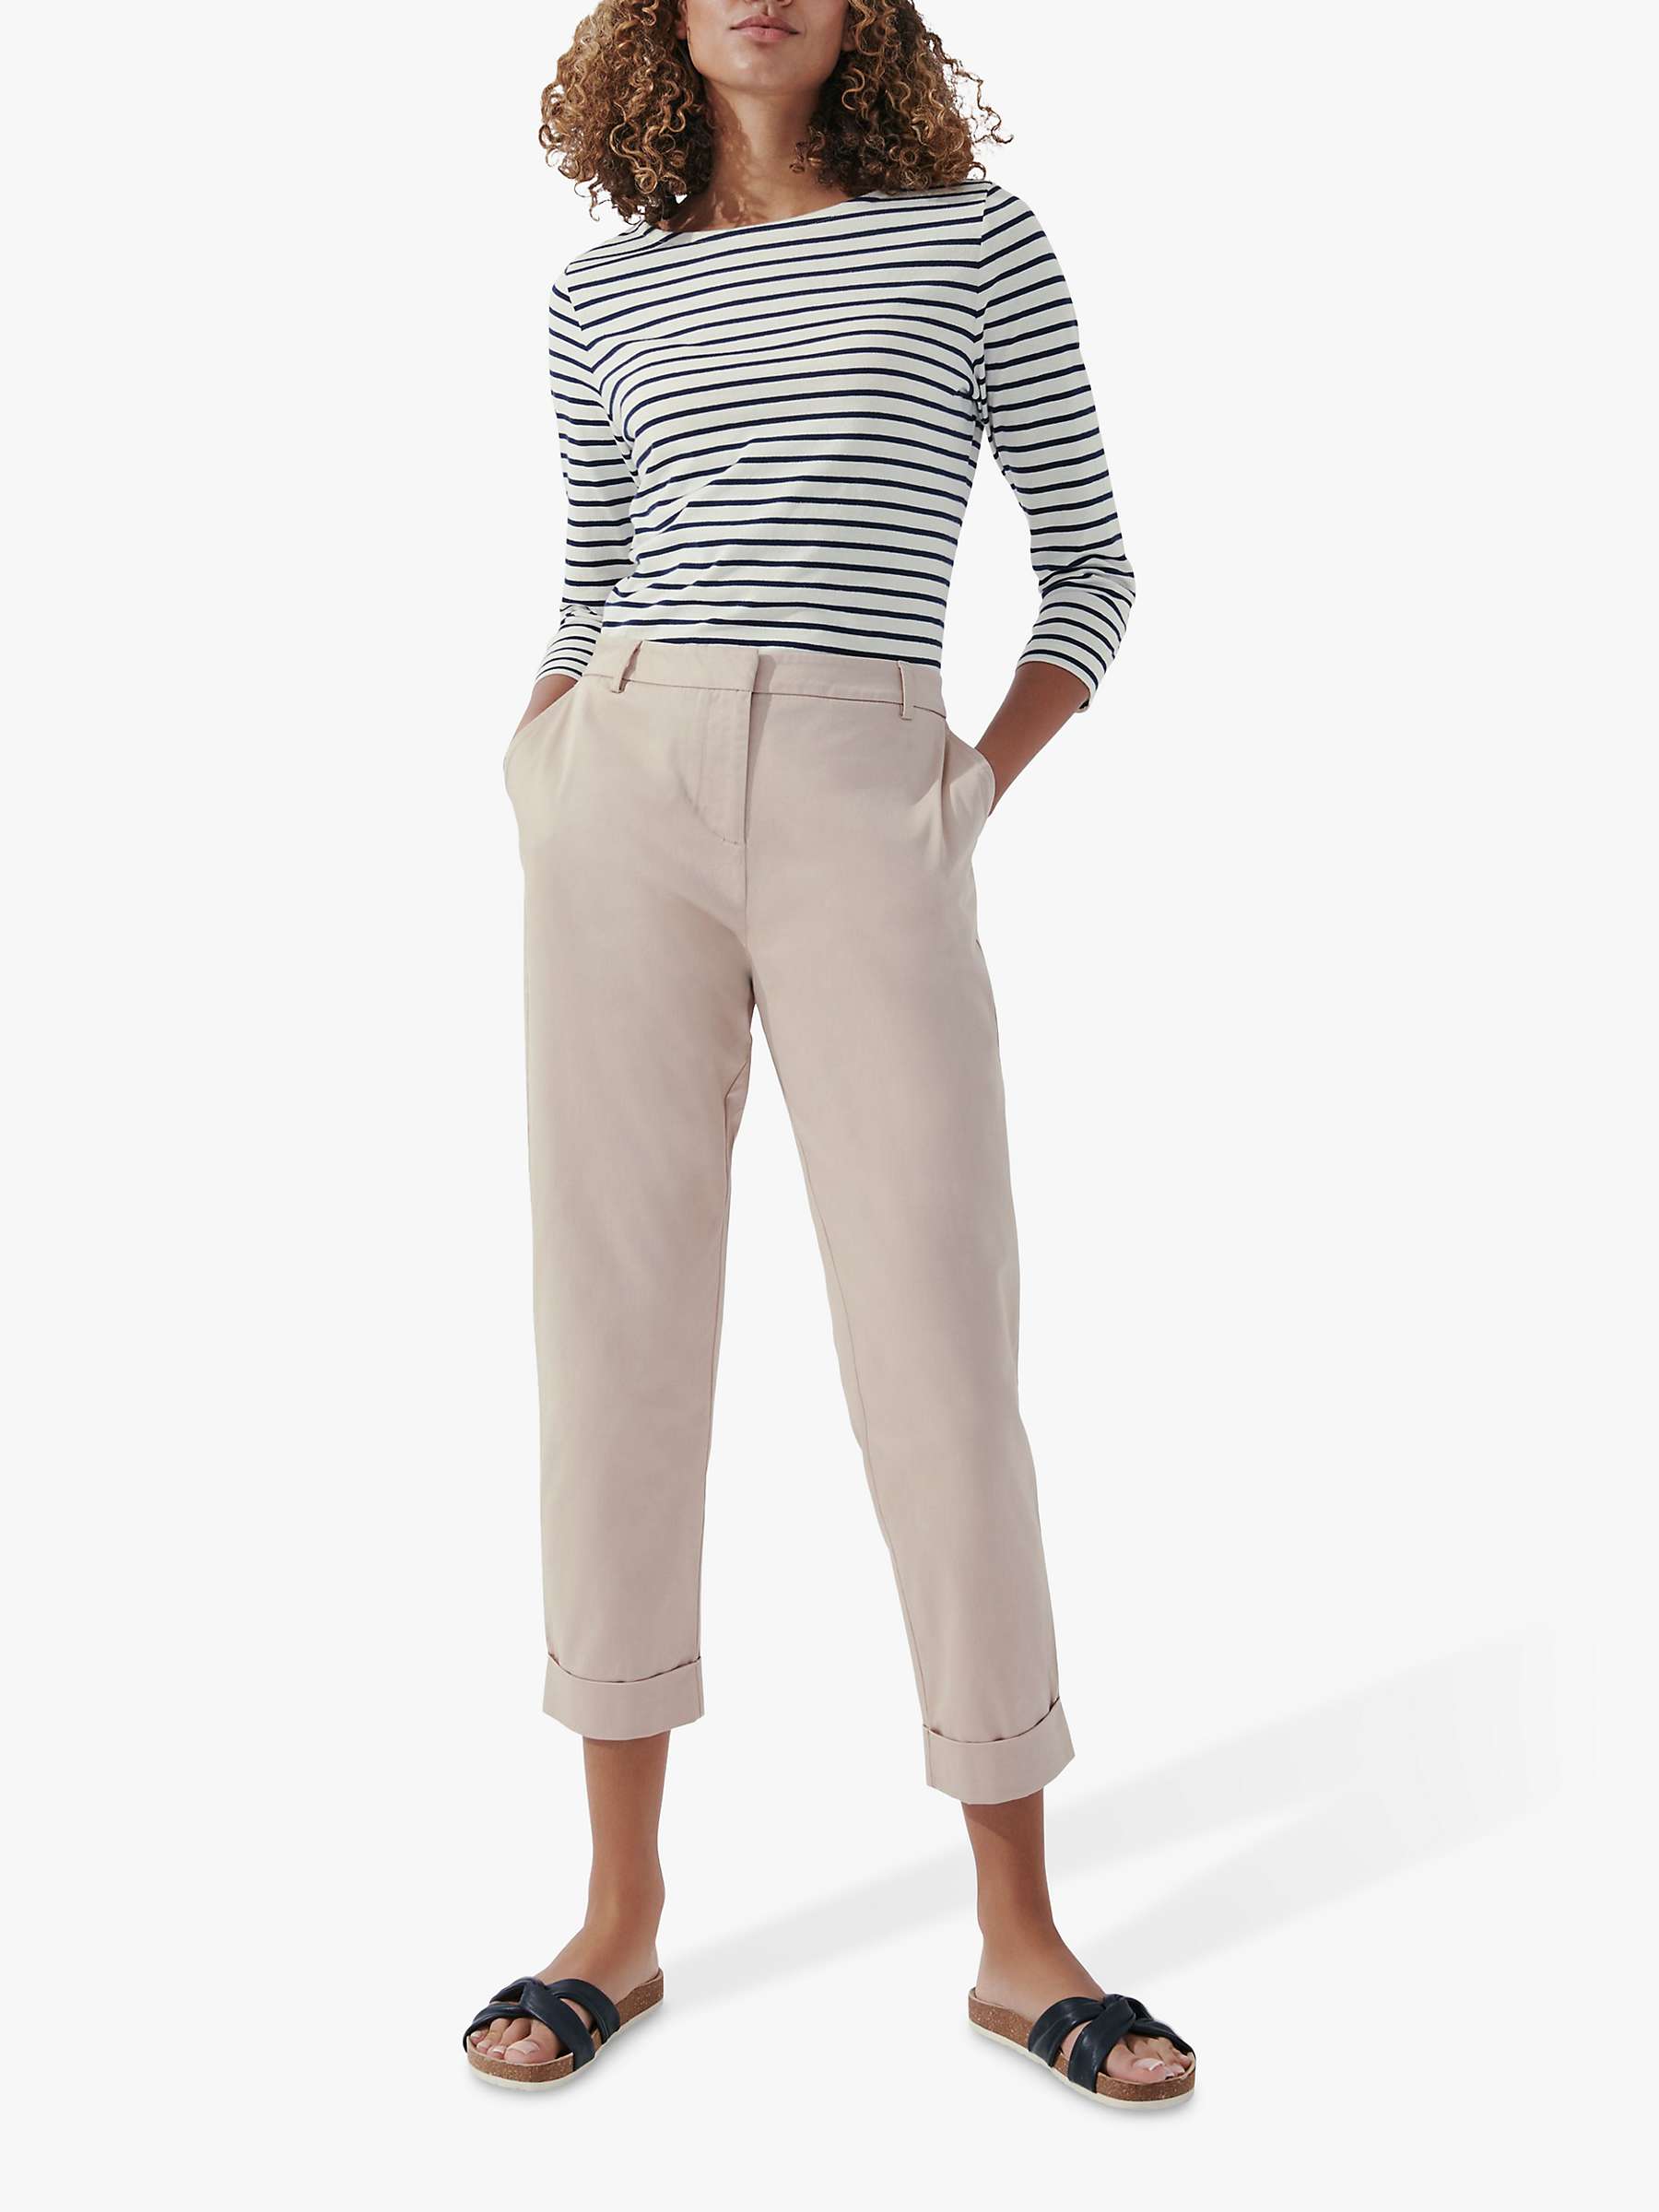 Buy Crew Clothing Weekday Trousers, Stone Online at johnlewis.com